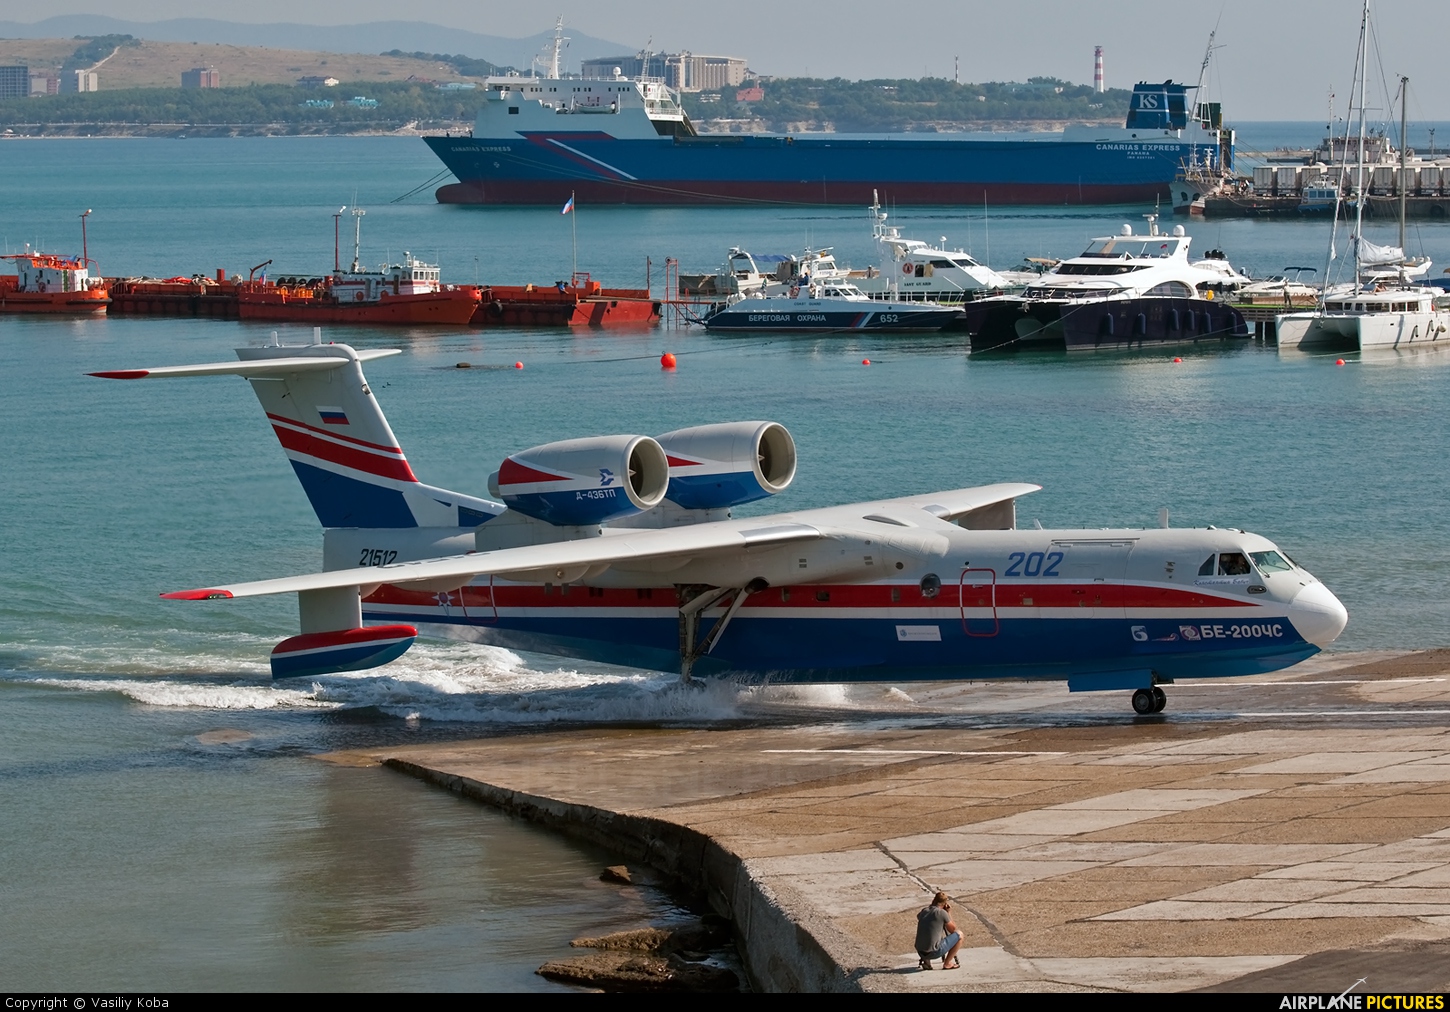 Turkey may purchase Be-200 amphibious aircraft from Russia after